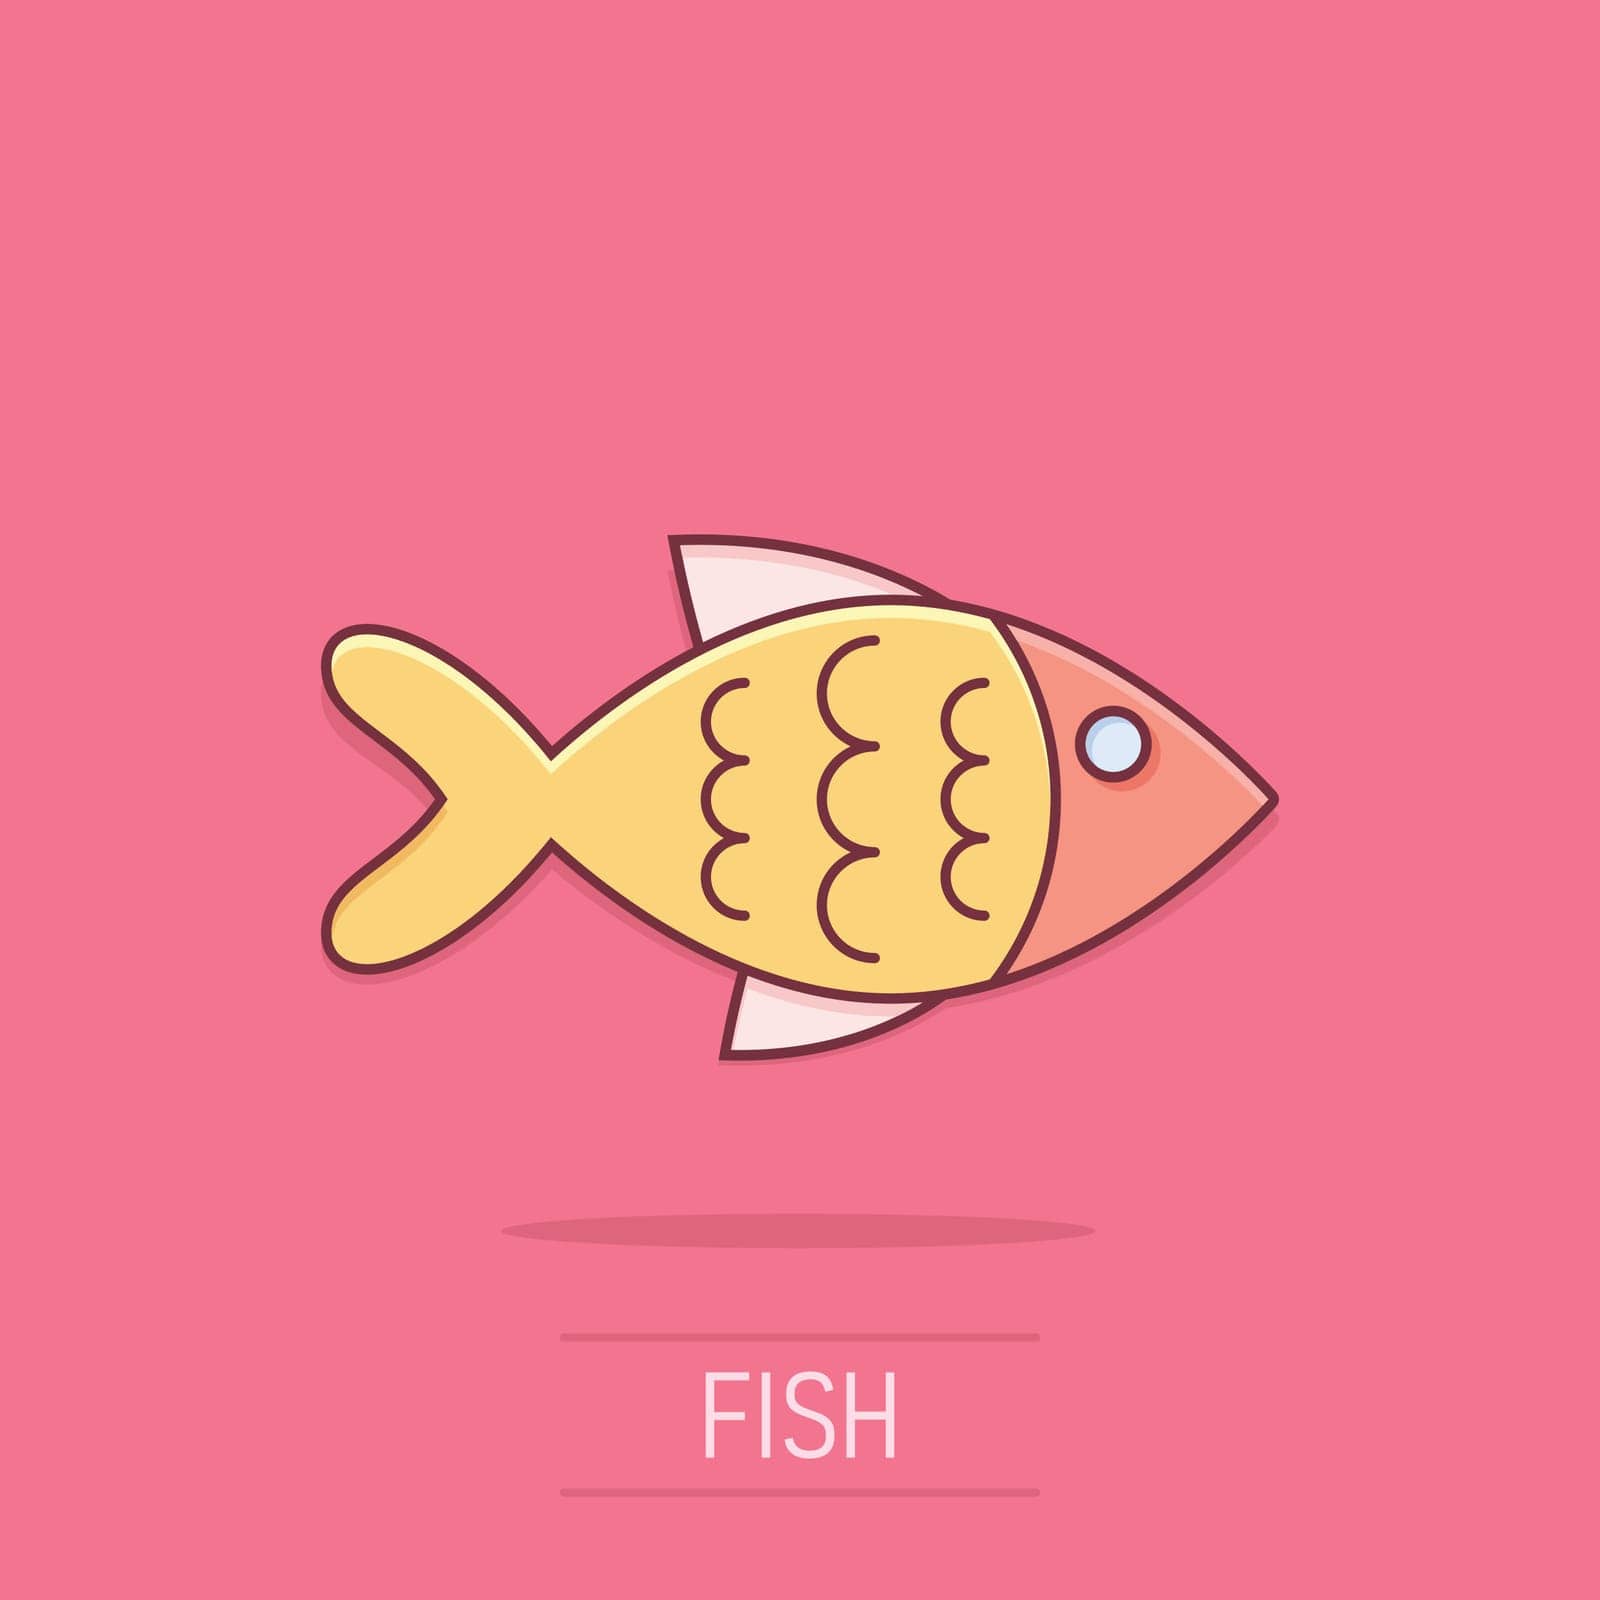 Fish sign icon in comic style. Goldfish vector cartoon illustration on isolated background. Seafood business concept splash effect. by LysenkoA